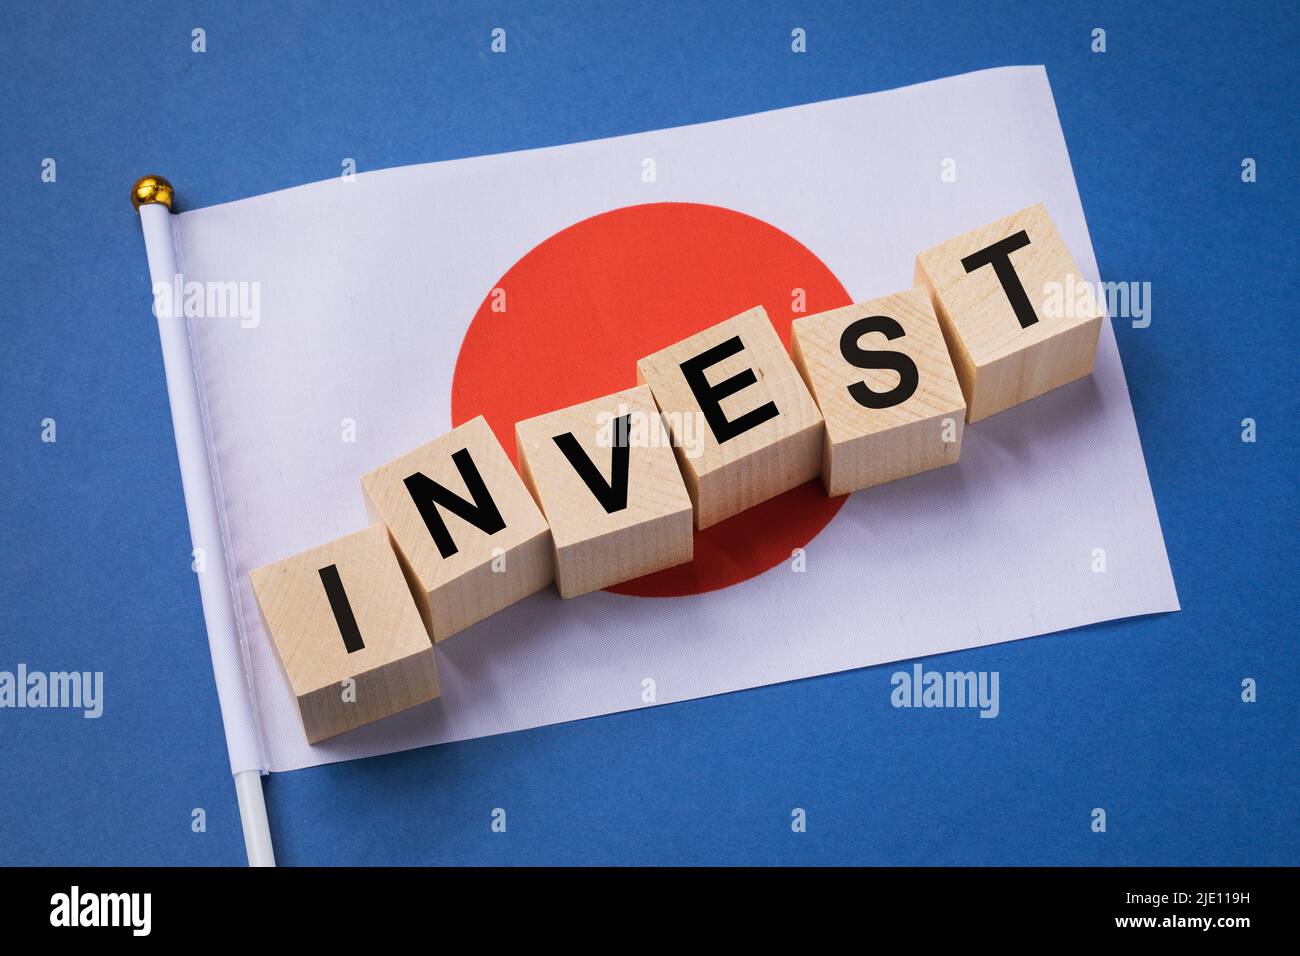 Wooden cubes with text and flag on colored background, investment concept from Japan Stock Photo